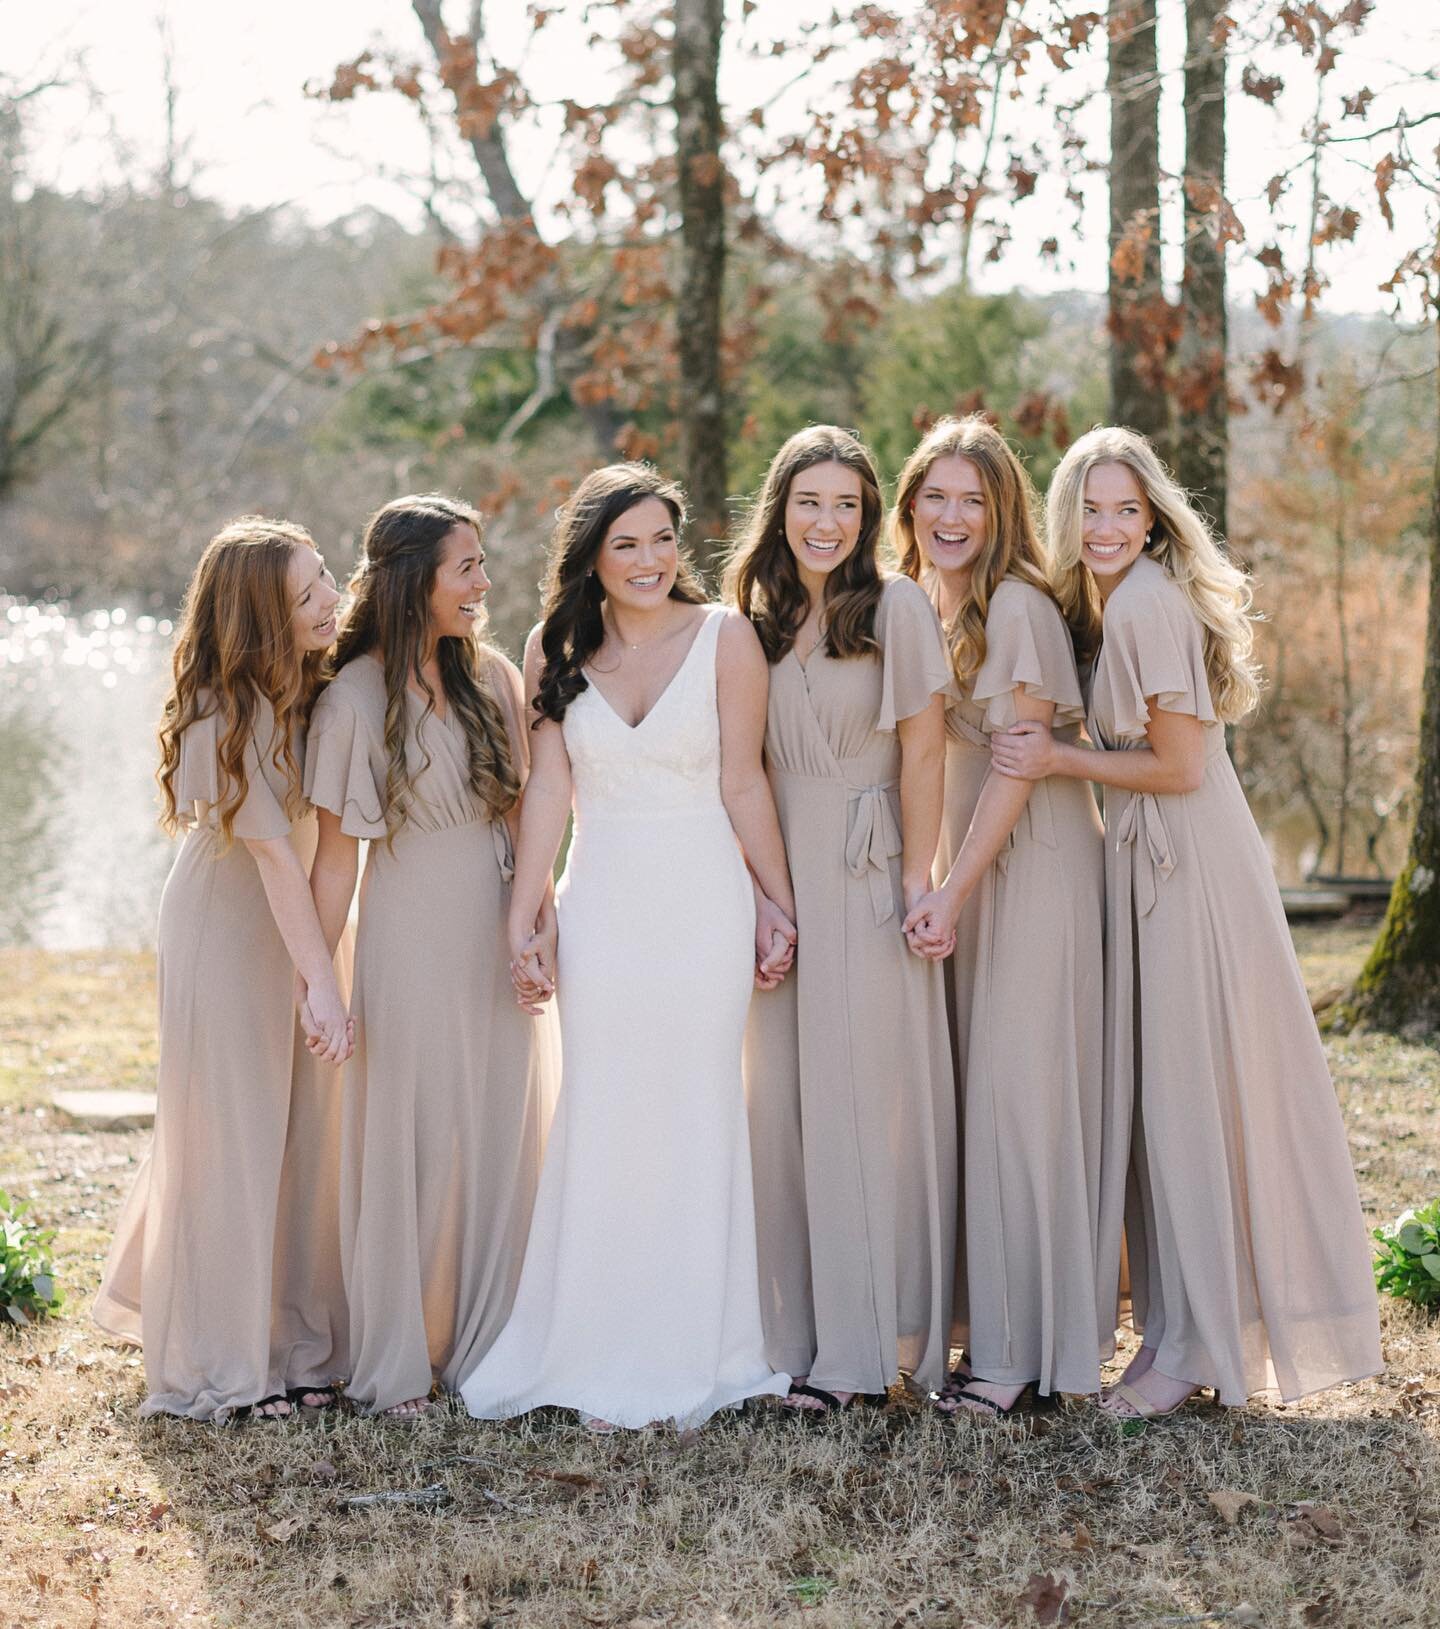 one of the best parts of weddings is seeing close friends spend a whole day or whole weekend together full of joy and laughter. a gift to witness and a gift to experience! 
#weddingphotography #arkansasweddingphotographer #arkansasbride